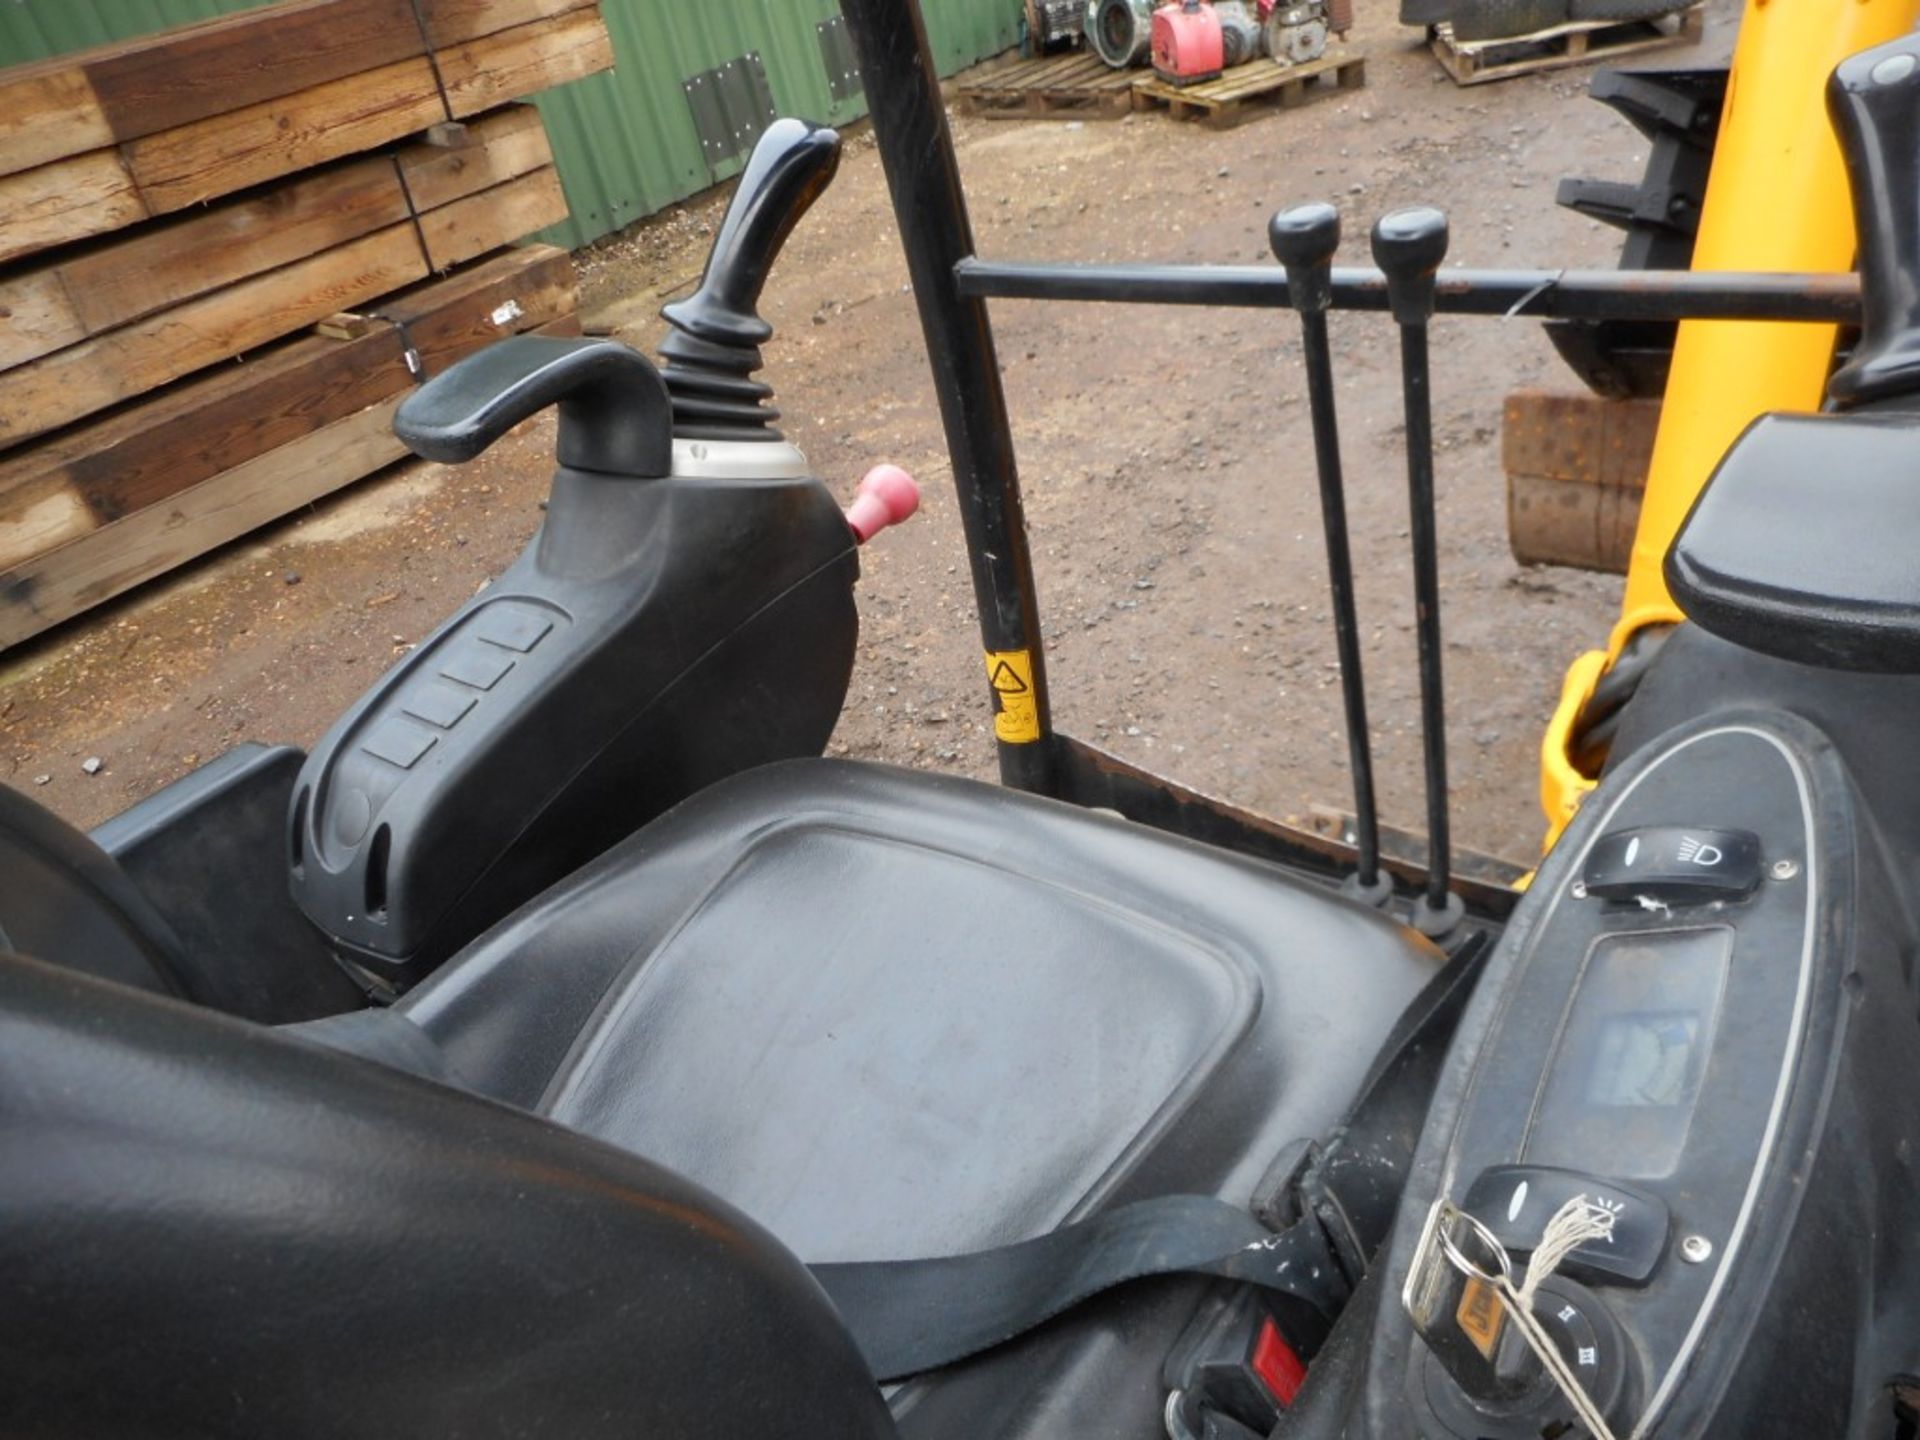 JCB 801-4 mini digger c/w 3no. buckets yr2011 build 1200 recorded hours. - Image 11 of 17